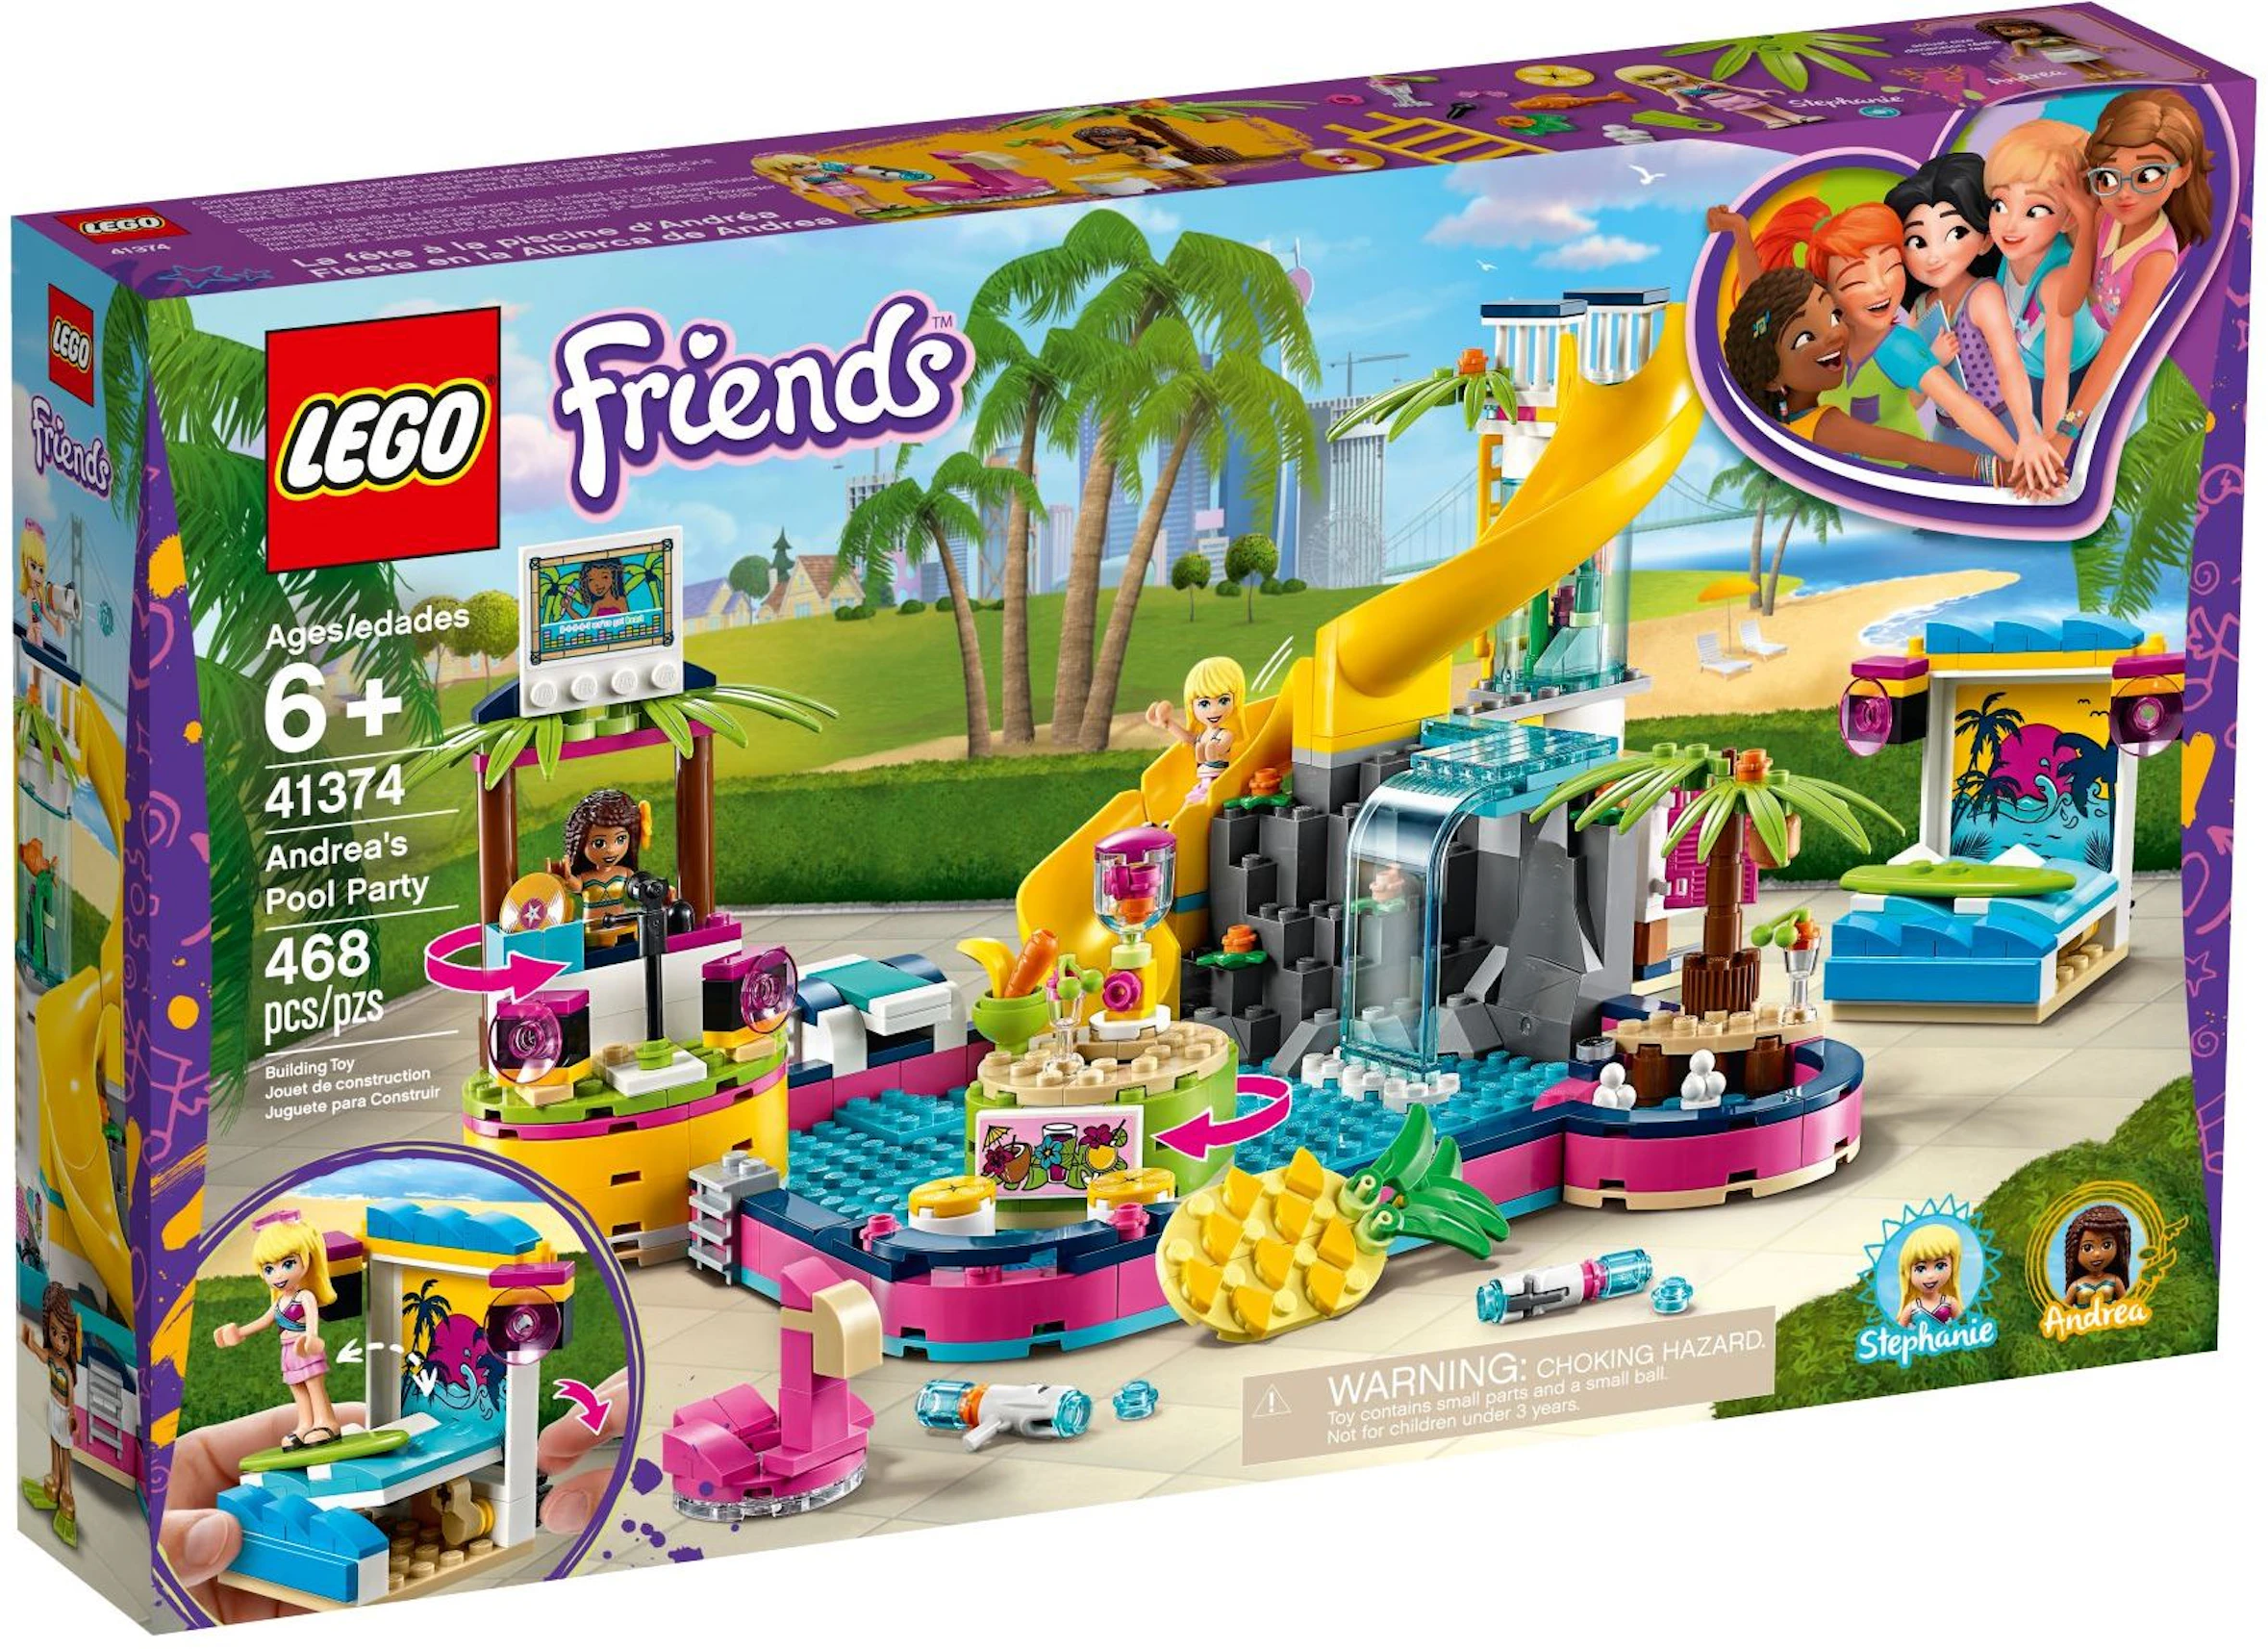 LEGO Friends Andrea's Pool Party Building Set - wide 7